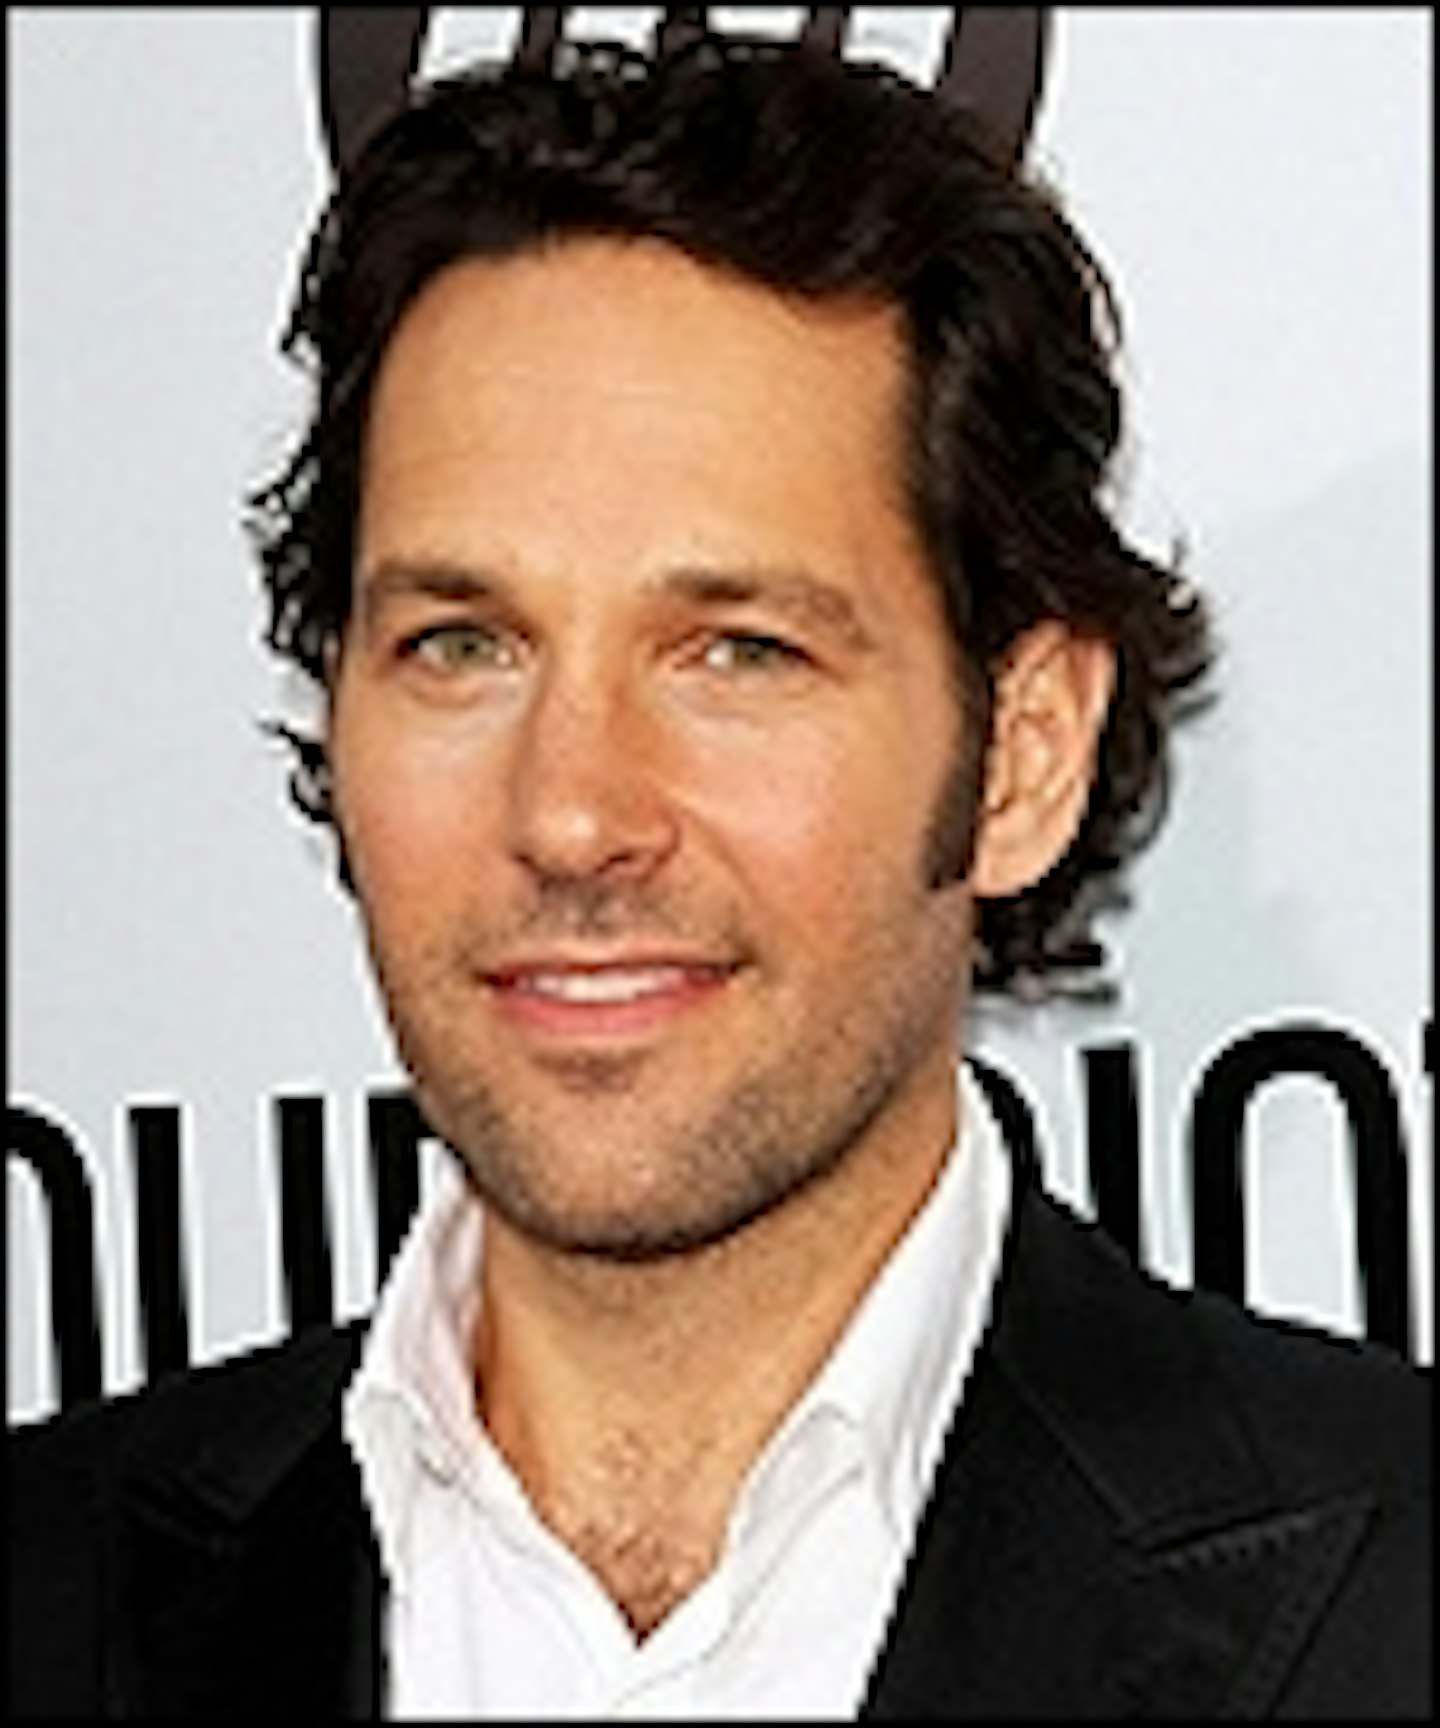 Paul Rudd Up For Admission